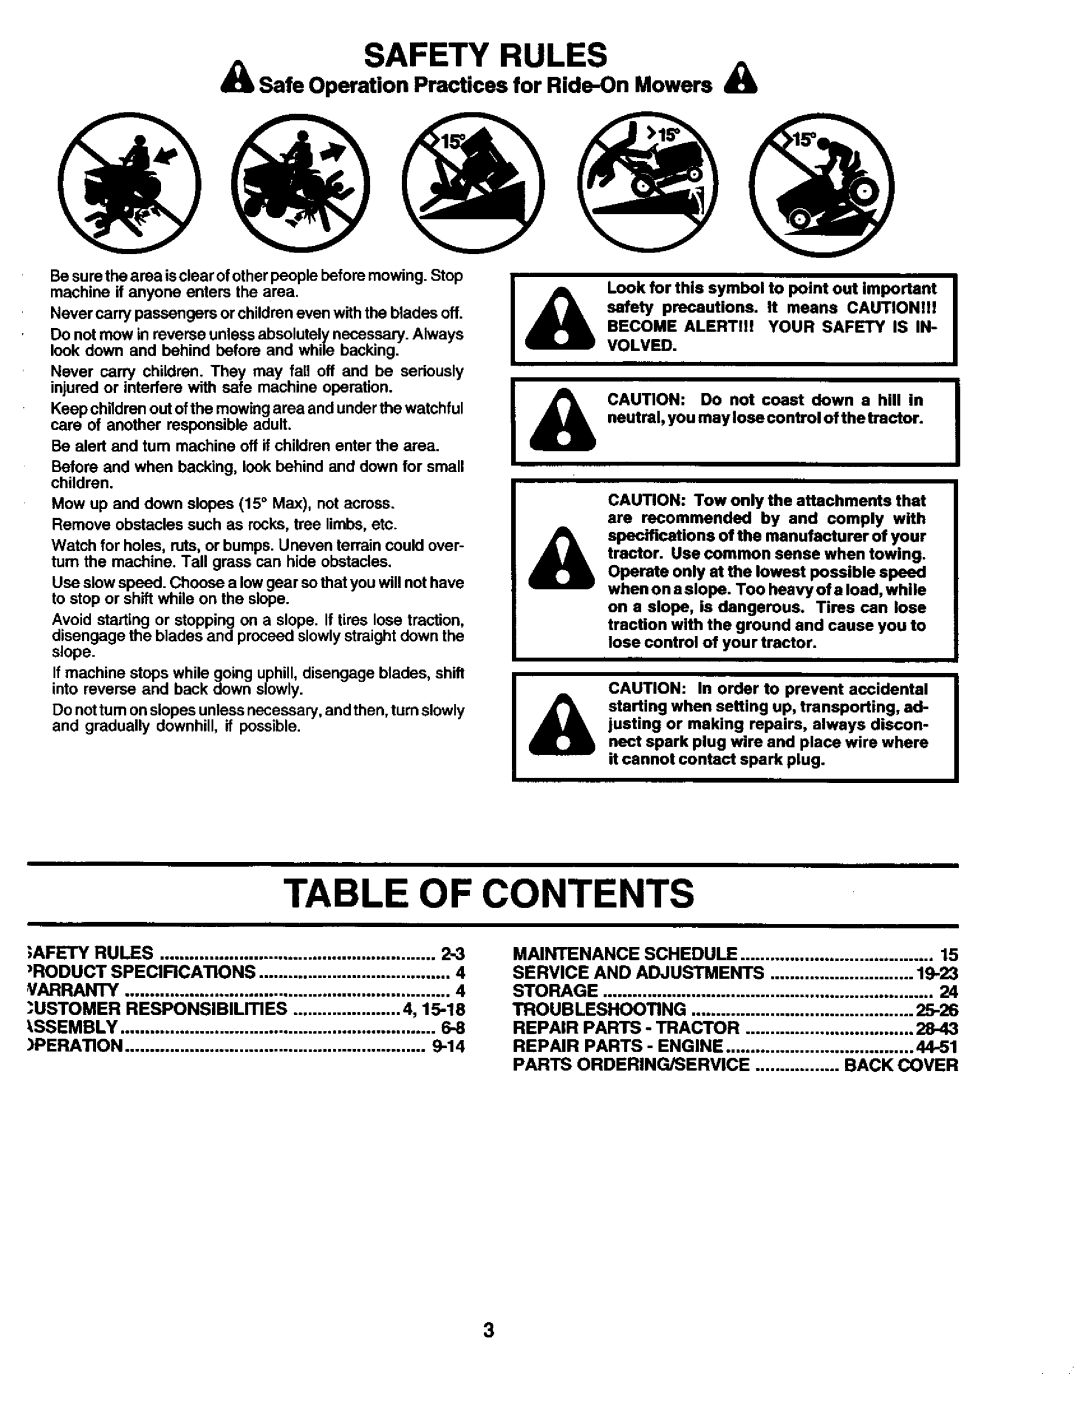 Craftsman 944.602951 Table Of Contents, Safety Rules, Safe Operation Practices for Ride-OnMowers, Parts Ordering/Service 